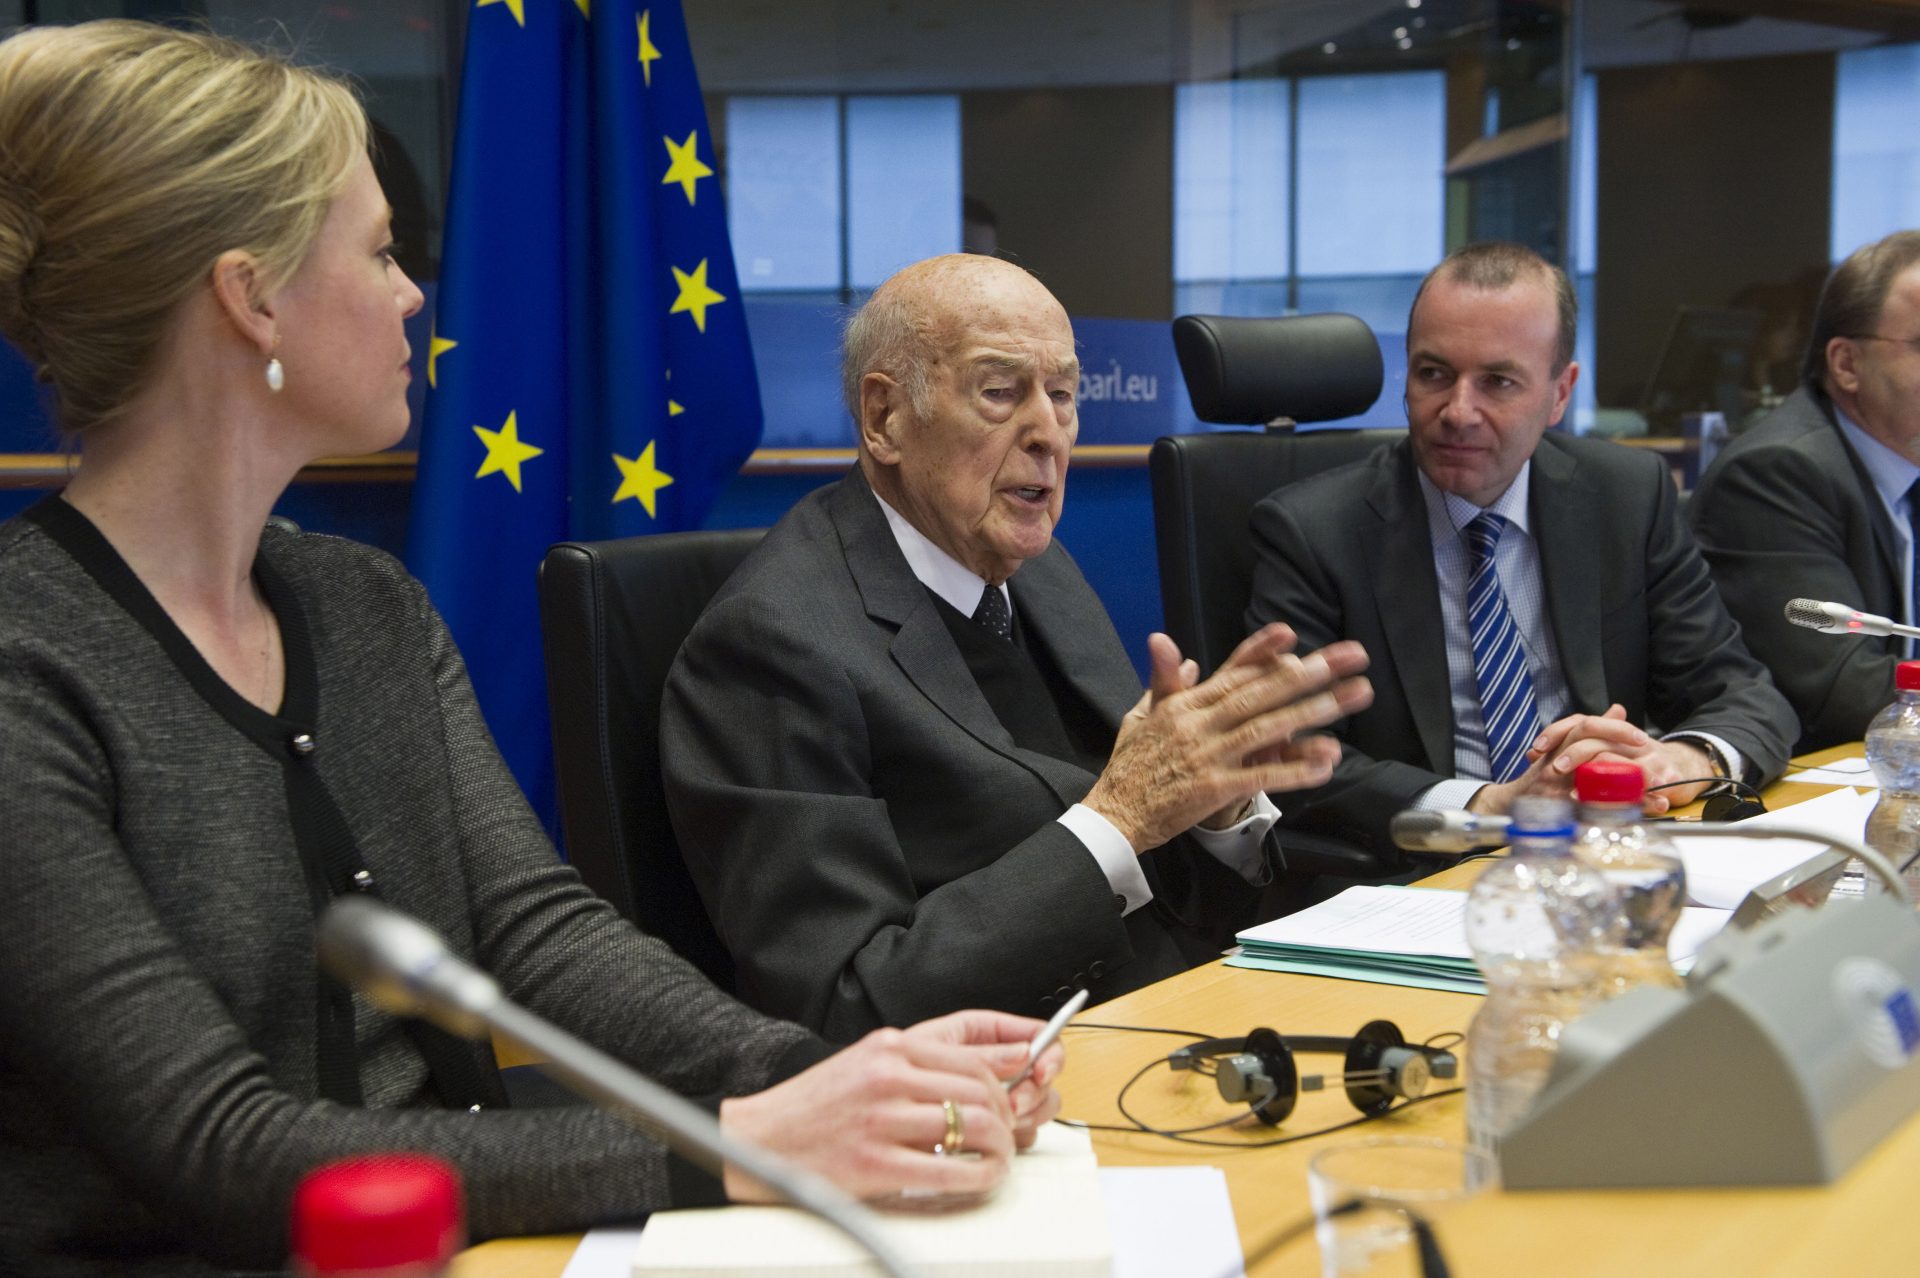 Giscard d'Estaing deliveries a speech while Erika Widegren and Manfred Weber listen to him